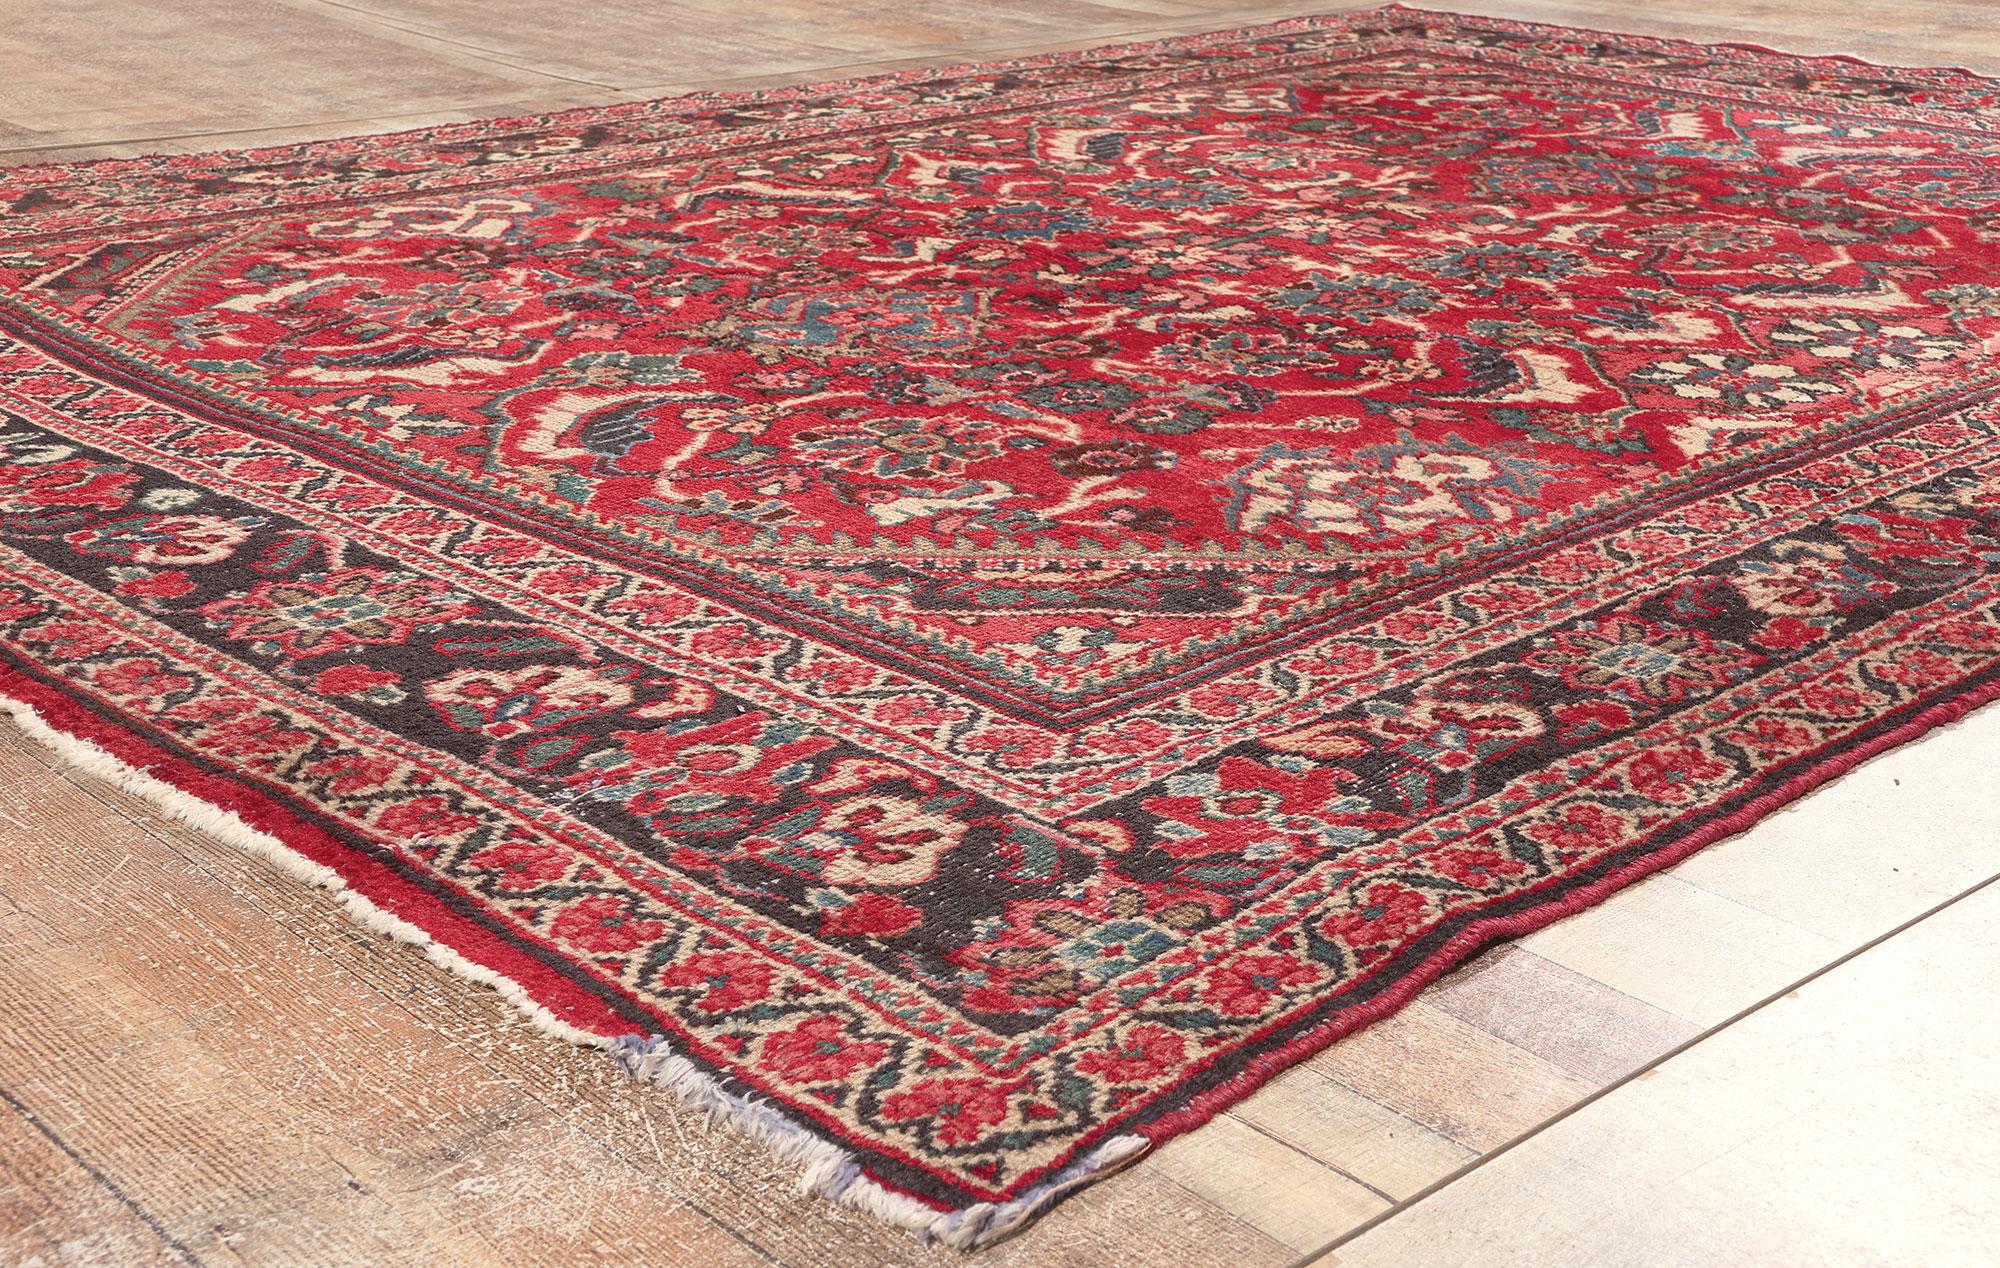 Vintage Red Persian Mahal Carpet In Good Condition For Sale In Dallas, TX